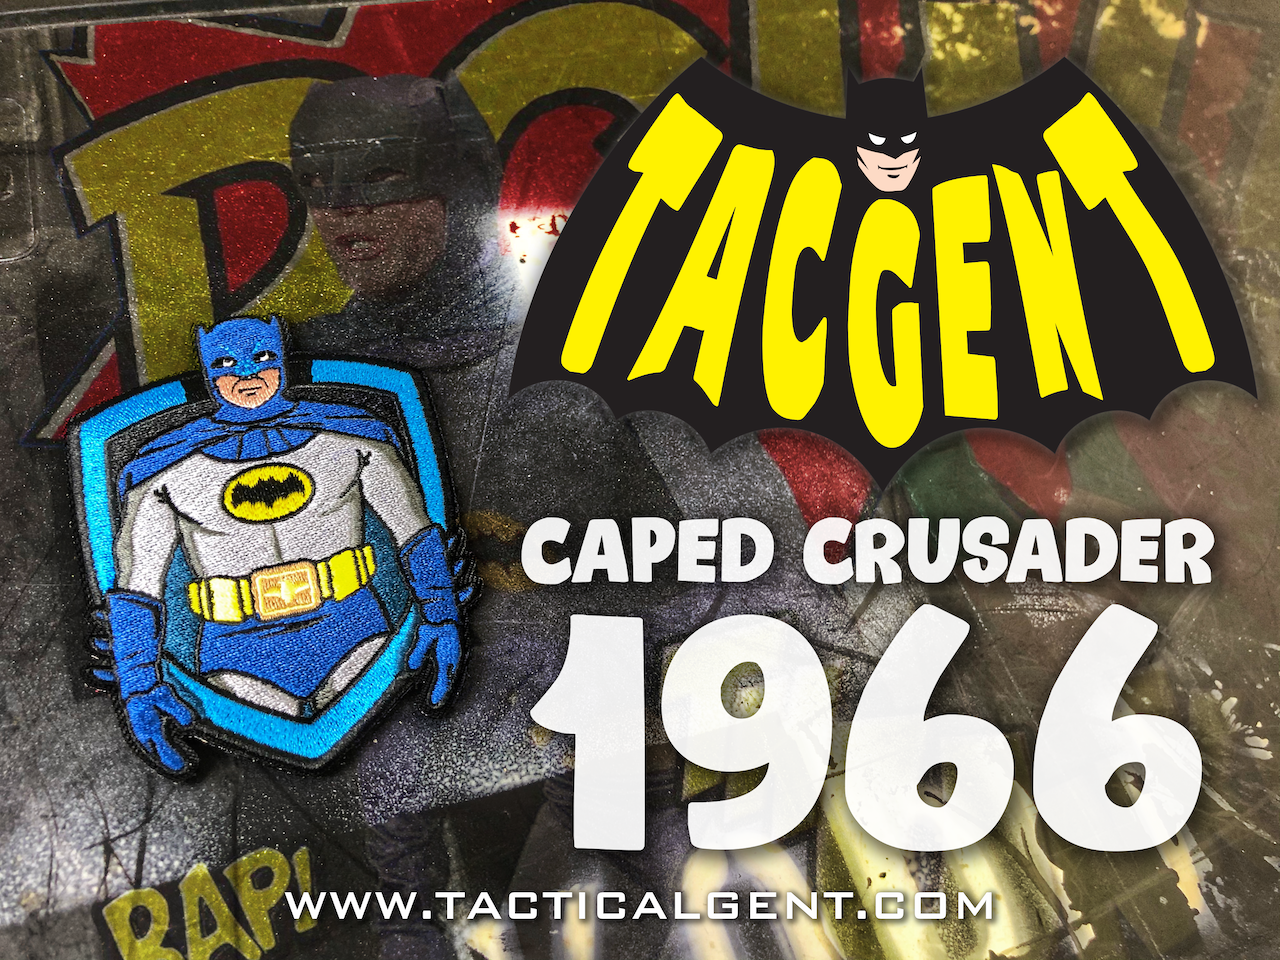 Caped Crusader 1966 Patch